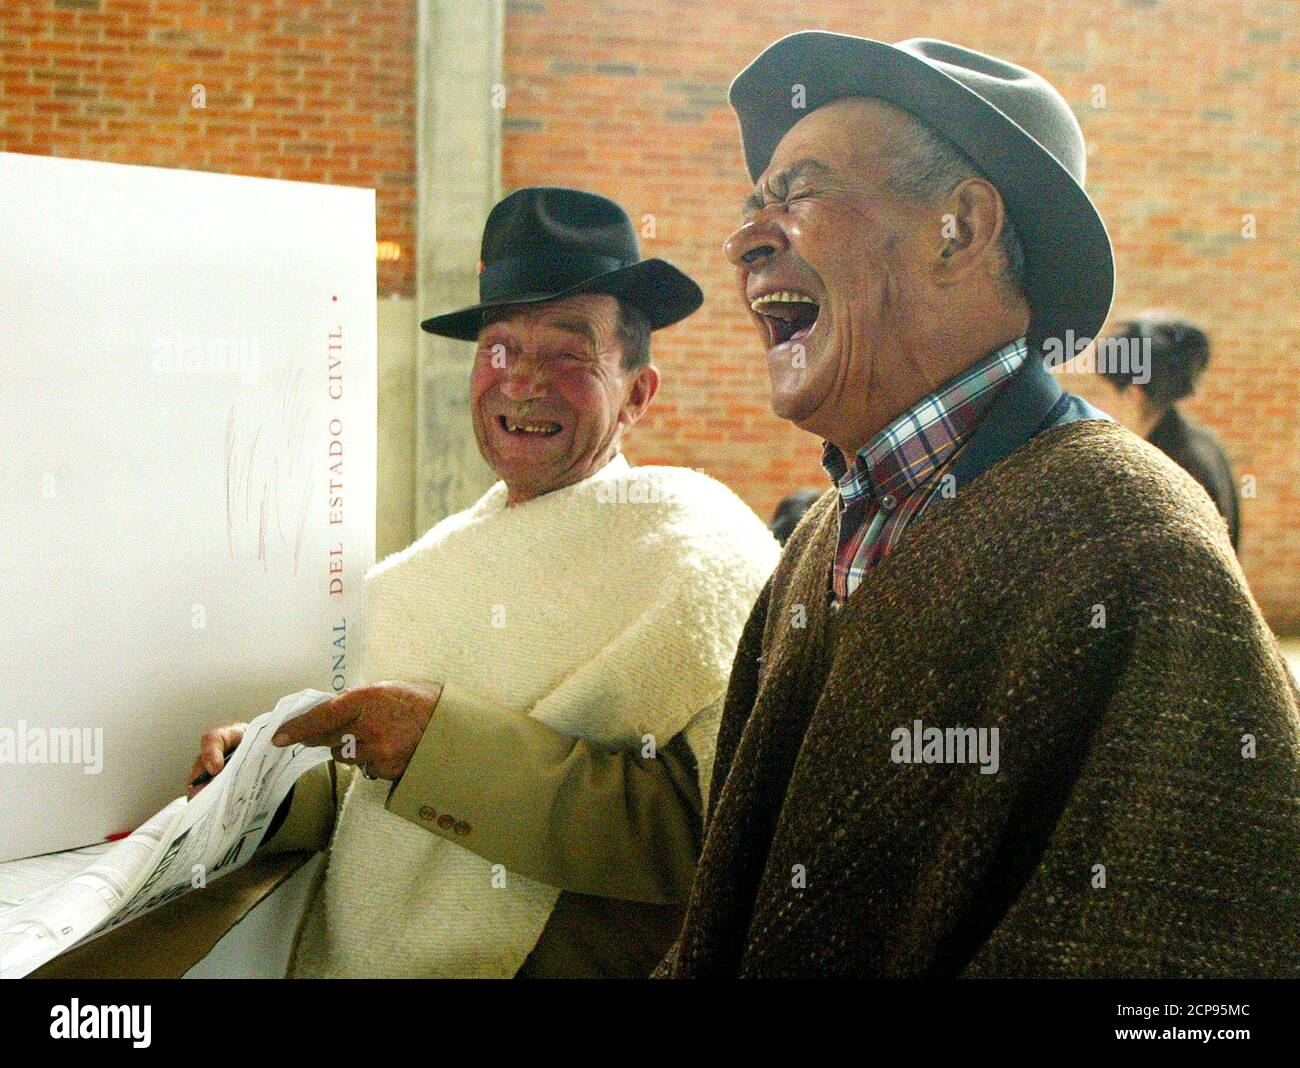 Two Colombians read the referendum in Guasca, Cundinamarca province, October 25, 2003. Colombians vote on Saturday on a crucial 15-point referendum that President Alvaro Uribe hopes will save the government $7 billion over seven years and reduce corruption. REUTERS/Daniel Munoz  DM/SV Stock Photo